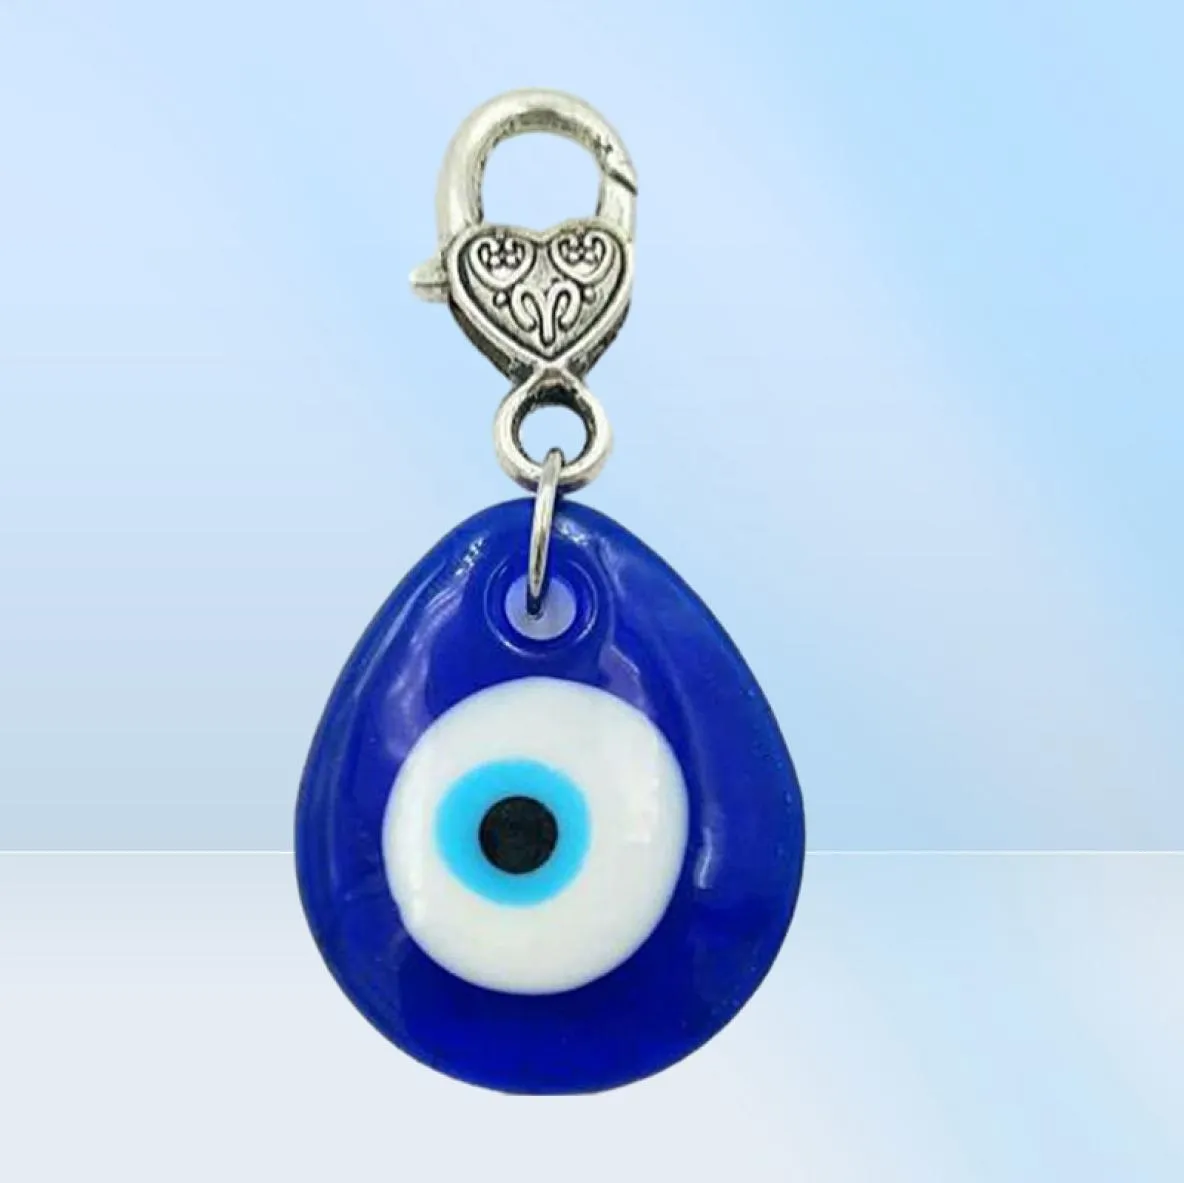 10pcsLot Vintage Silver Turkish teardrop blue Glass evil eye Charm Keychain Gifts Fit Key Chains Accessories Jewelry A295247821